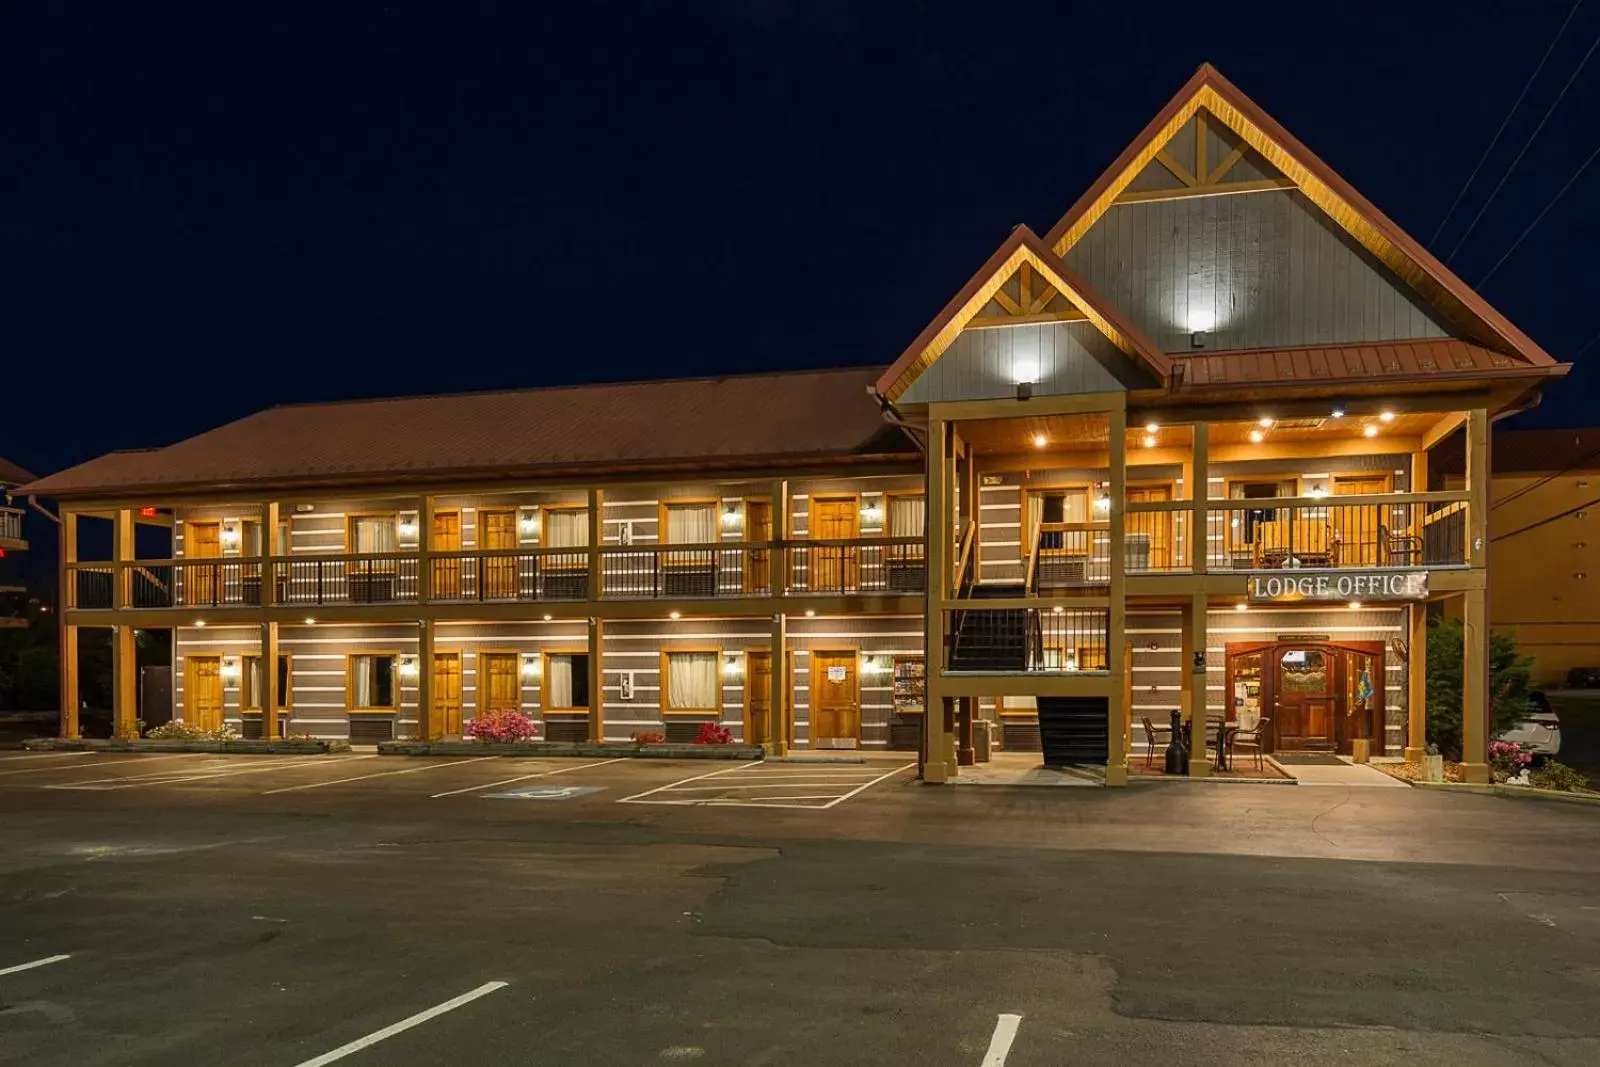 Night, Property Building in Timbers Lodge